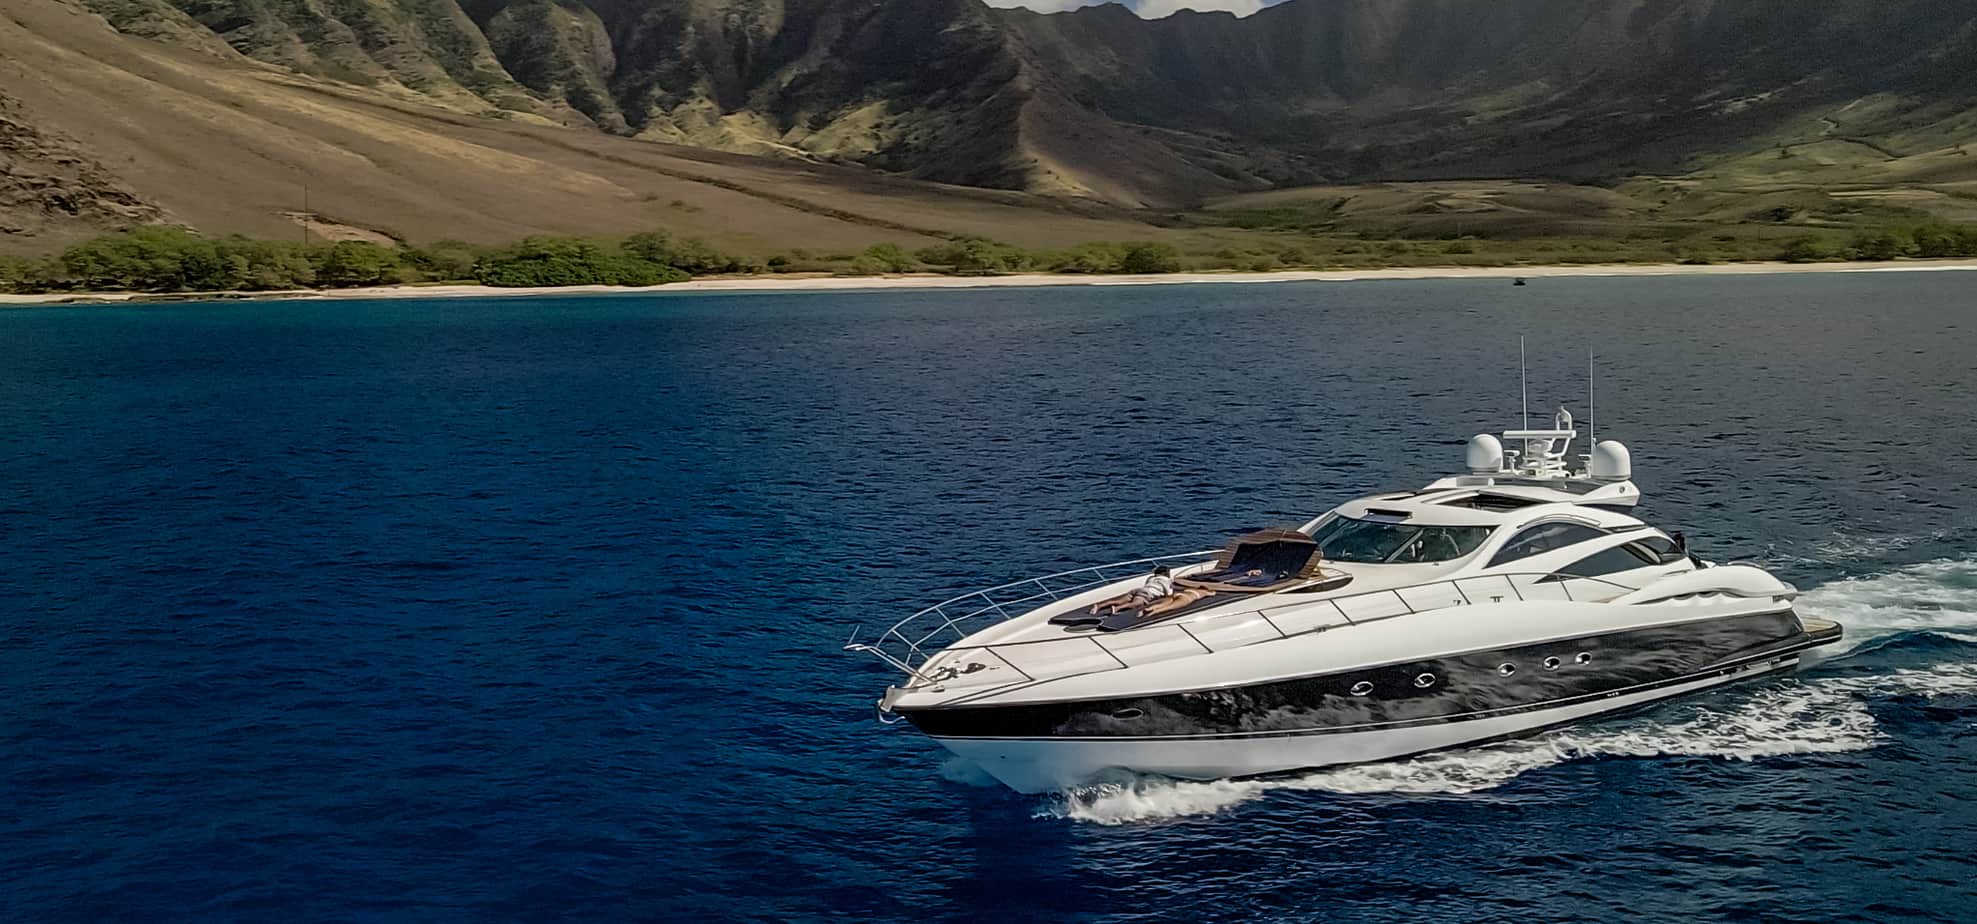 Maui Luxury Yacht Charter  Charter a Private Yacht in Maui